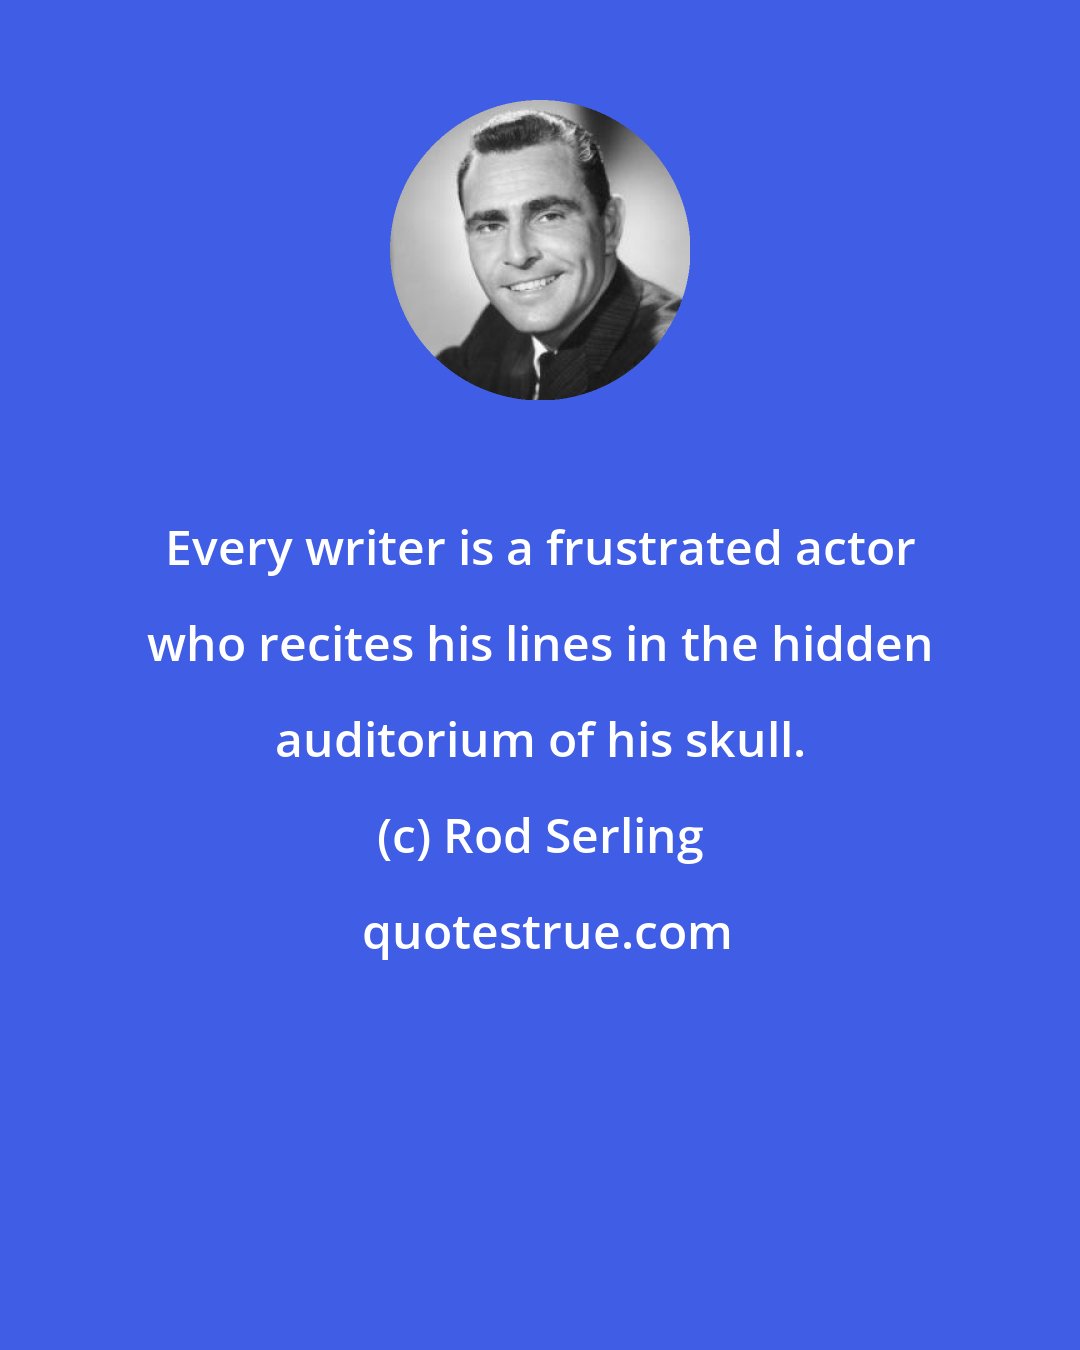 Rod Serling: Every writer is a frustrated actor who recites his lines in the hidden auditorium of his skull.